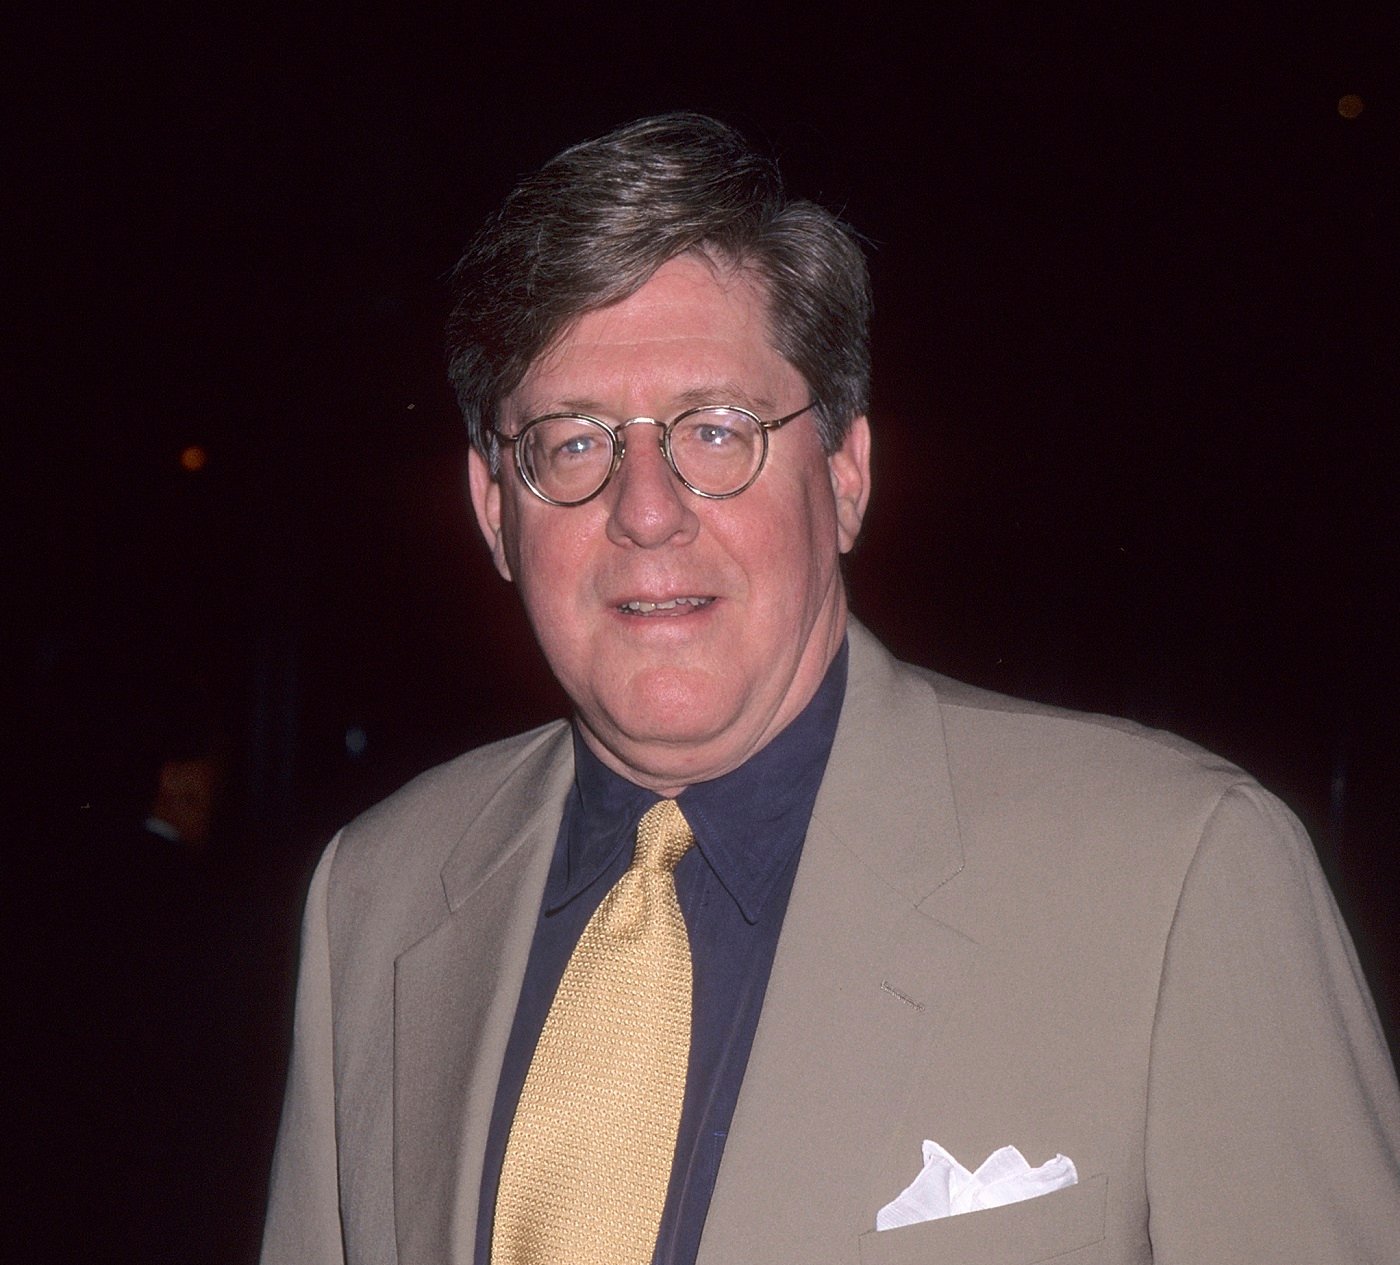 Edward Herrmann poses for a photo during the Screening of the HBO Original Movie "Soul of the Game" on April 17, 1996